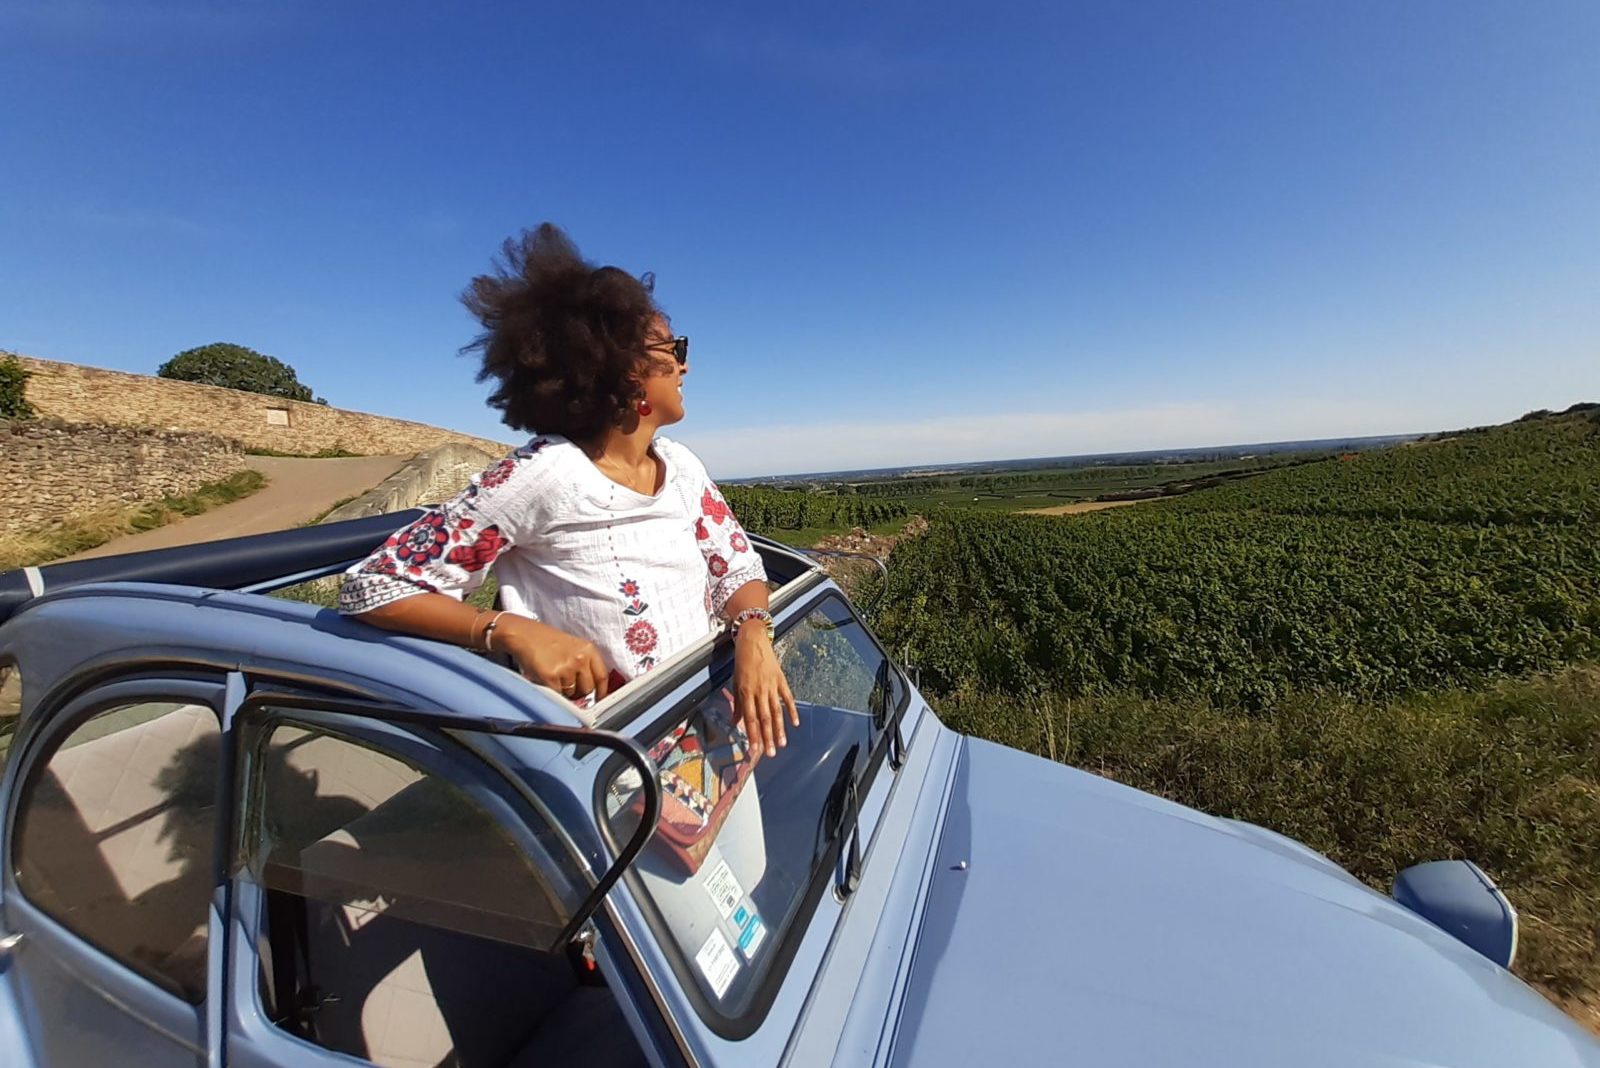 My French Tour - Unusual 2CV tour in the vineyards of Burgundy8